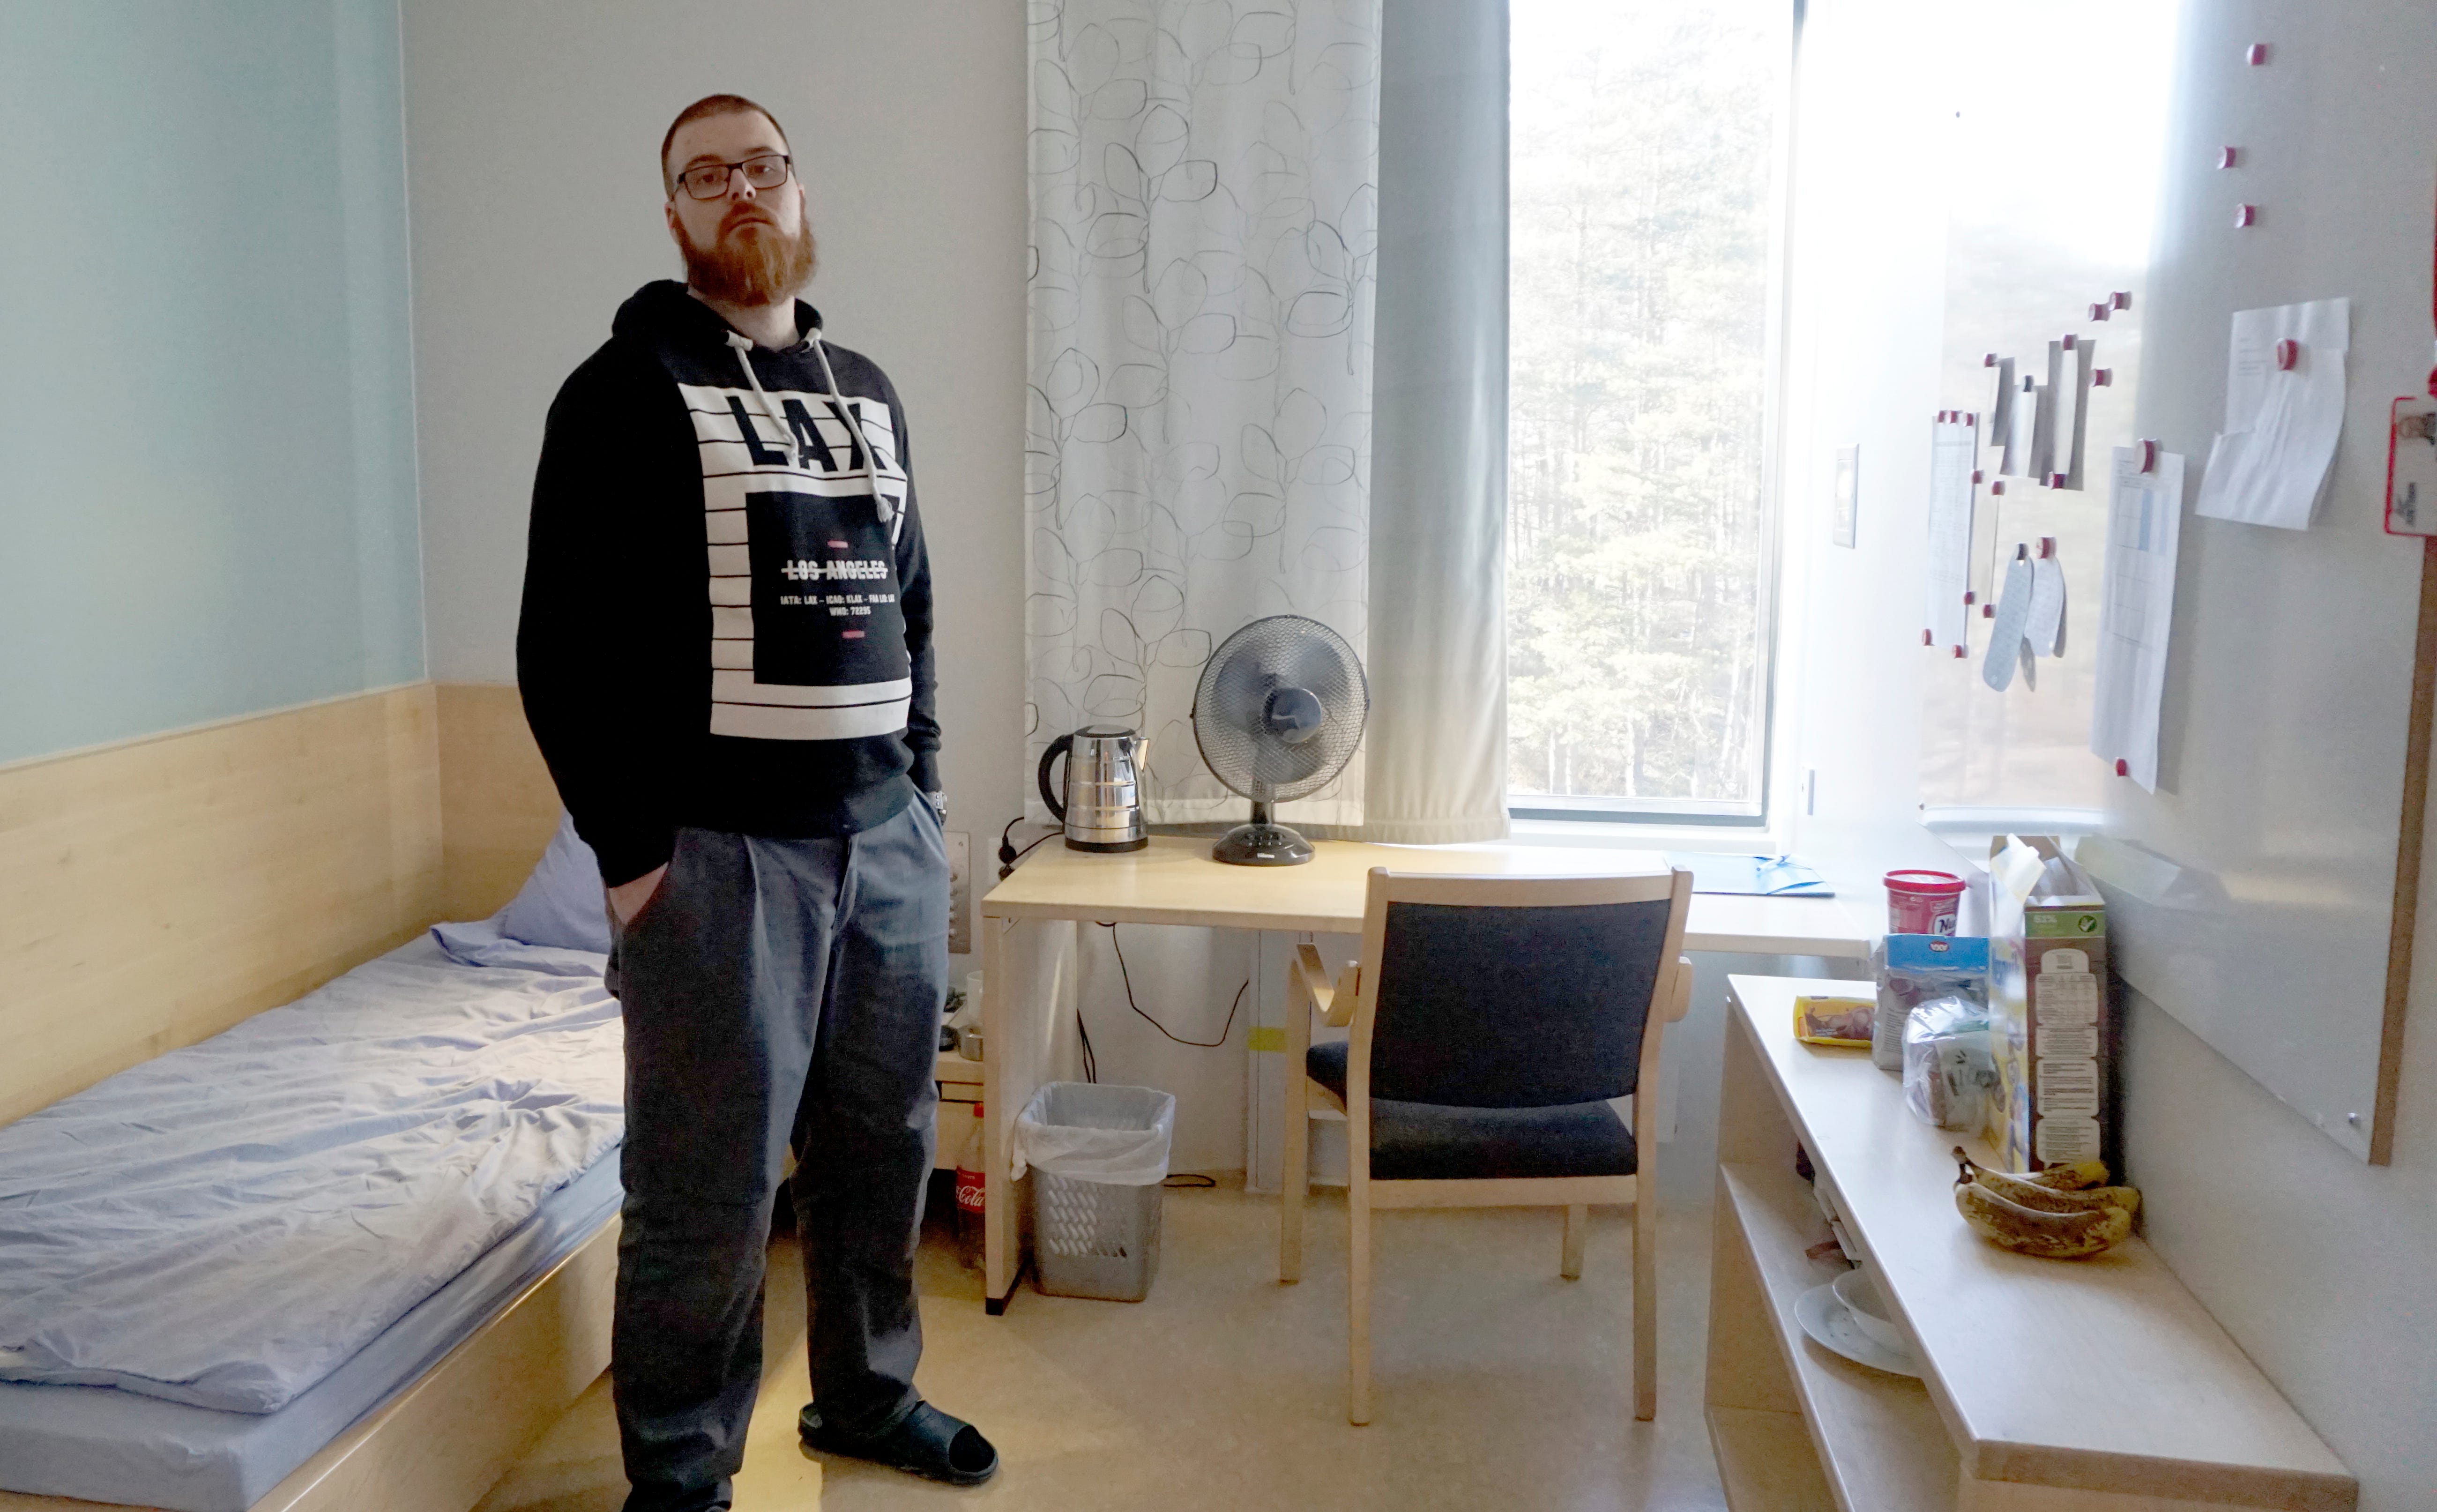 Andre, who asked that his last name be withheld, stands in his room at Halden Prison in Norway, where there are no bars, barbed wire or armed guards. He's there for the kidnap and torture of a man in Norway's drug underworld, and lives in a substance use treatment unit at Halden.